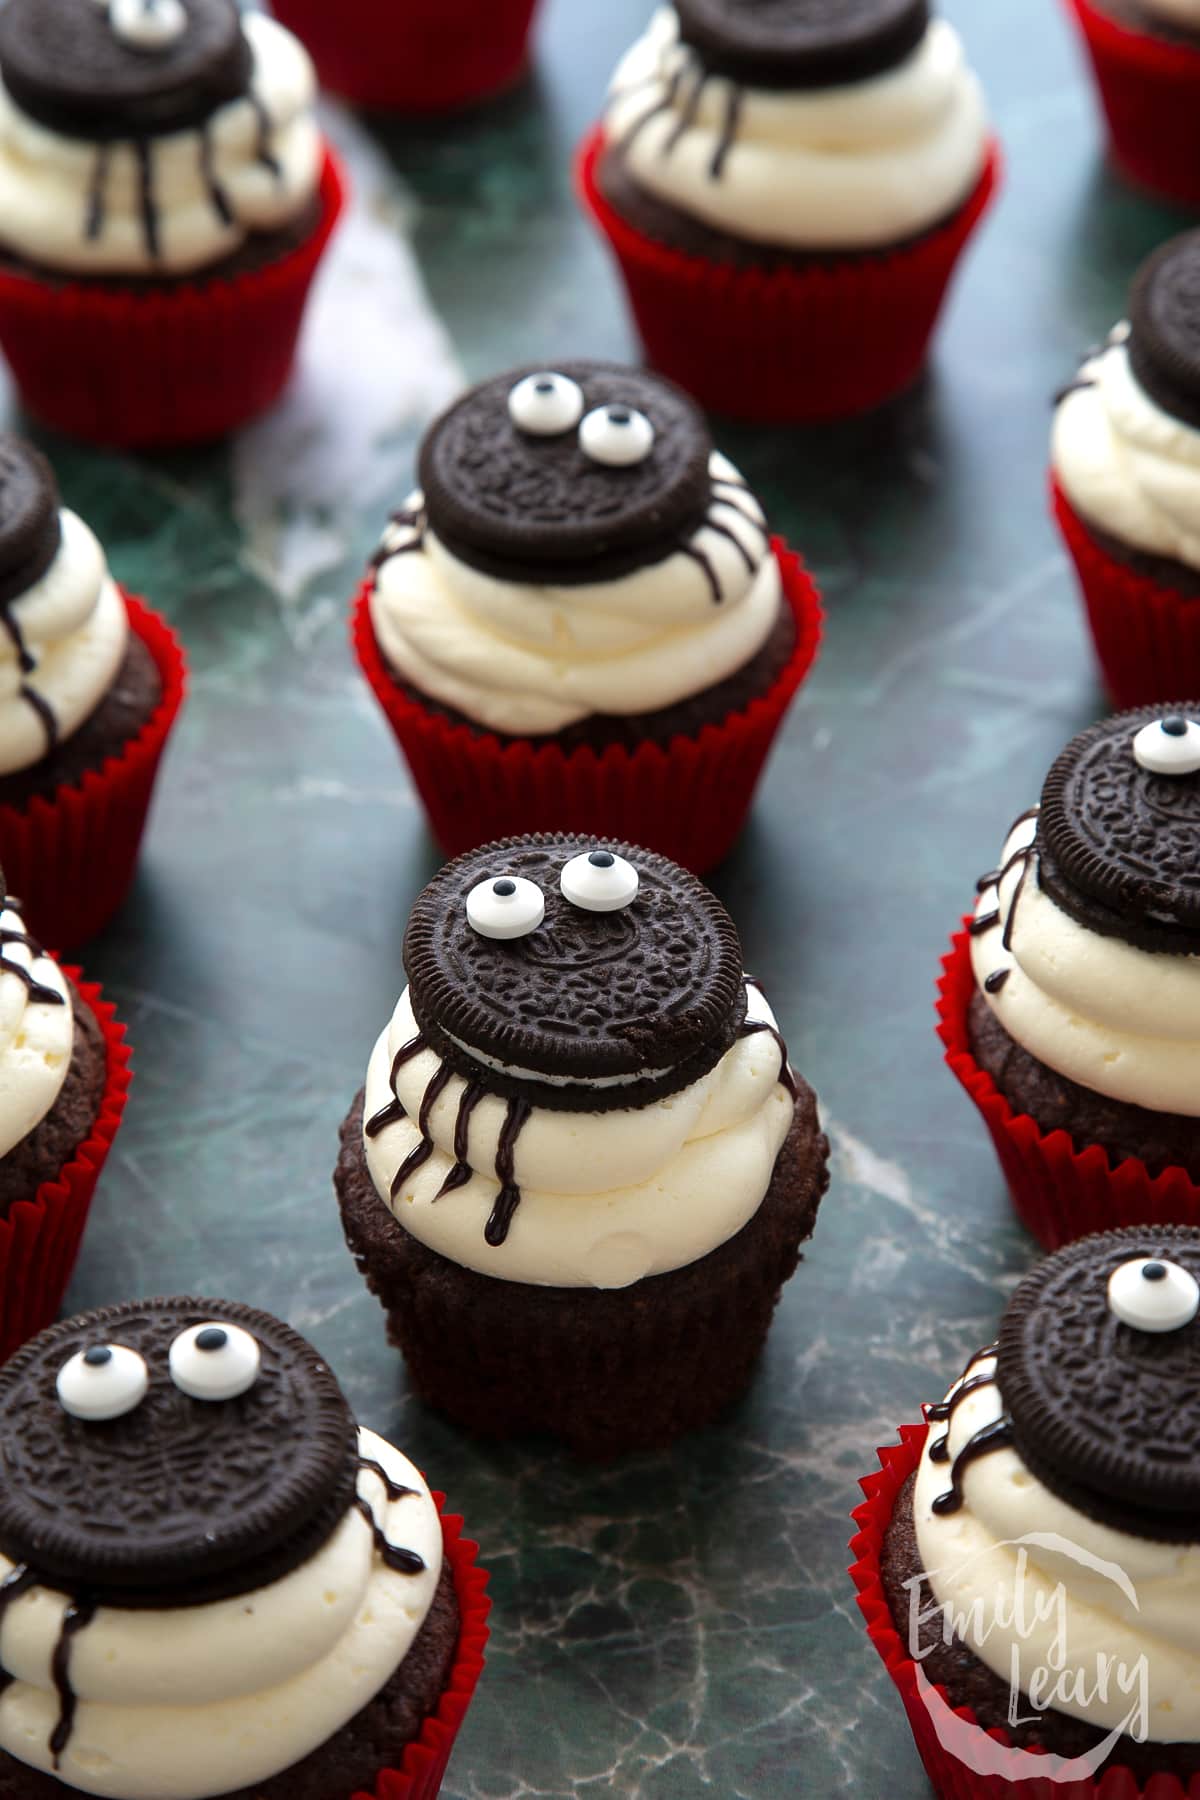 A vegan Halloween cupcake, decorated with Oreos and candy eyes to look like a spider. It is unwrapped and surrounded by more cupcakes.